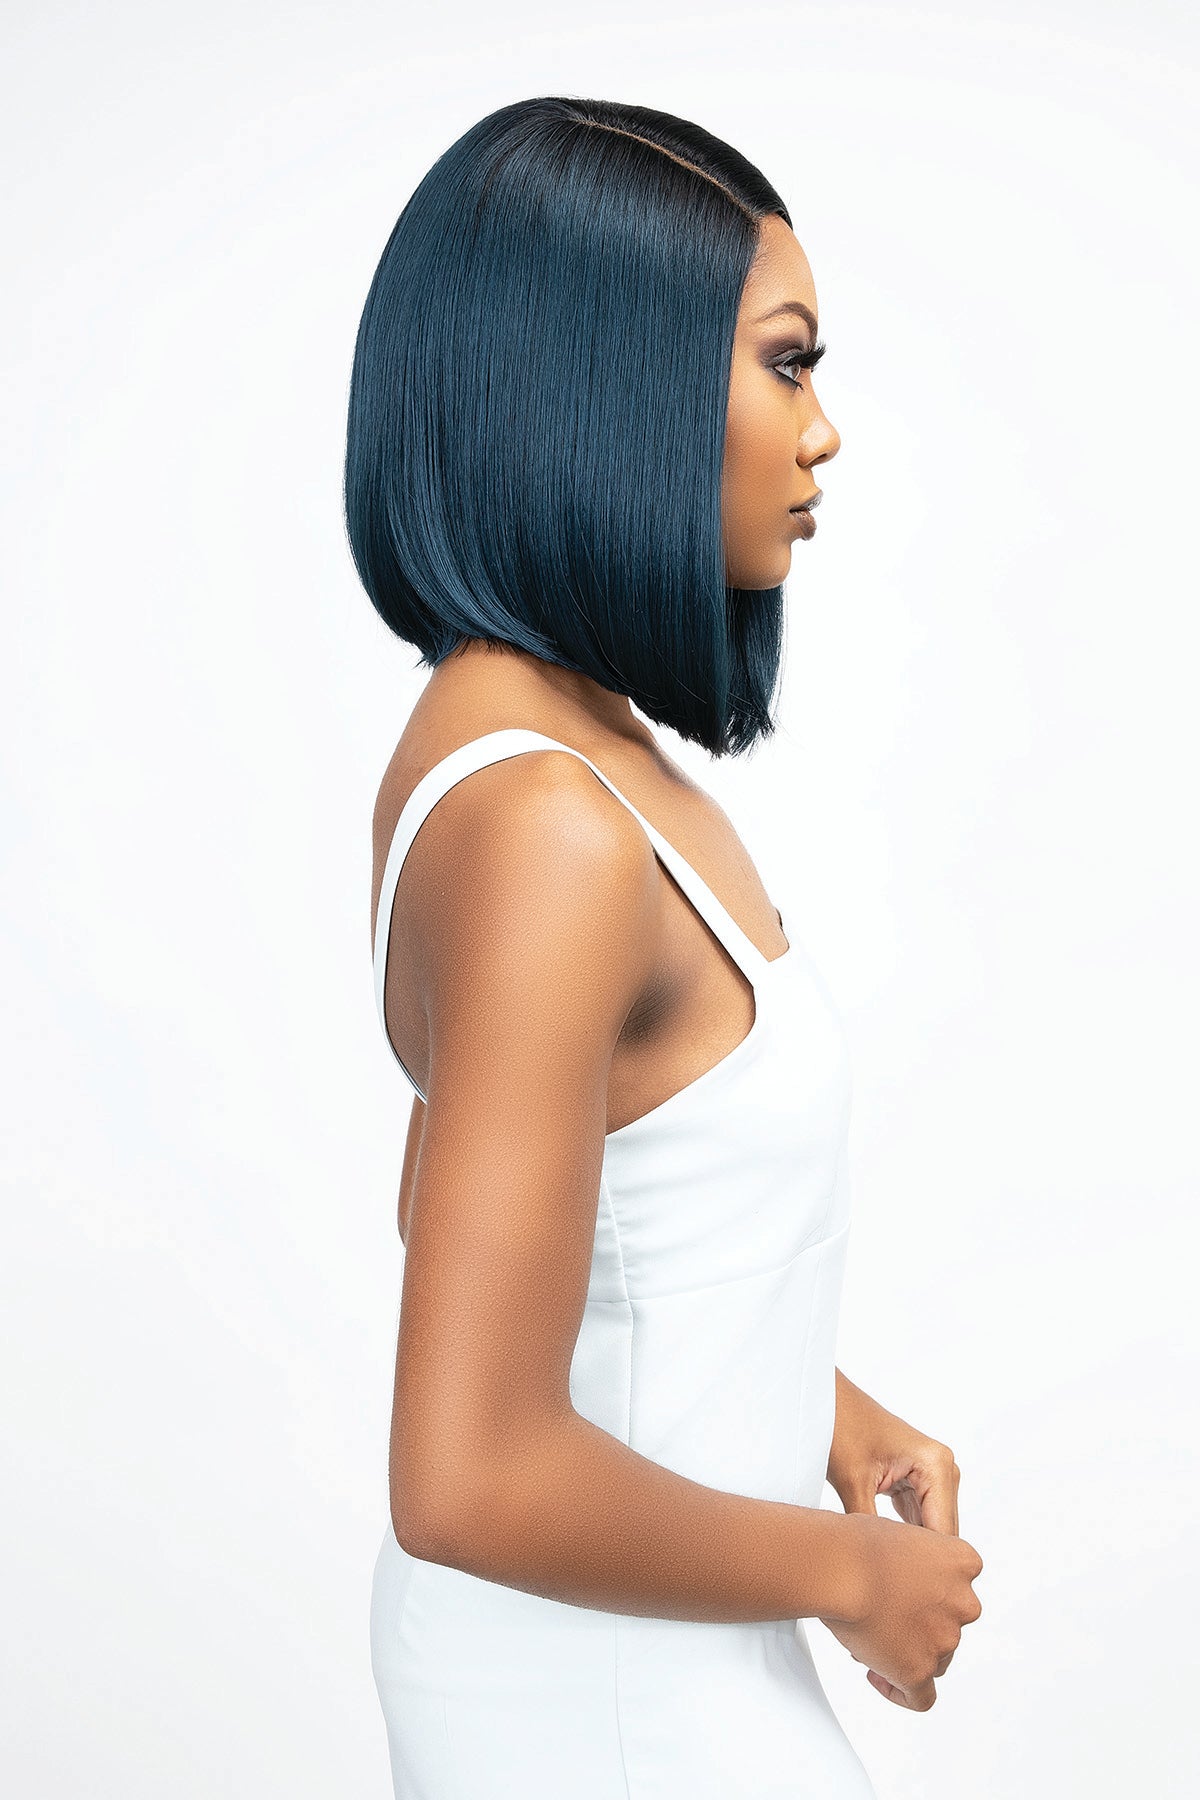 JANET COLLECTION ESSENTIALS LACE WIG - CHYNA